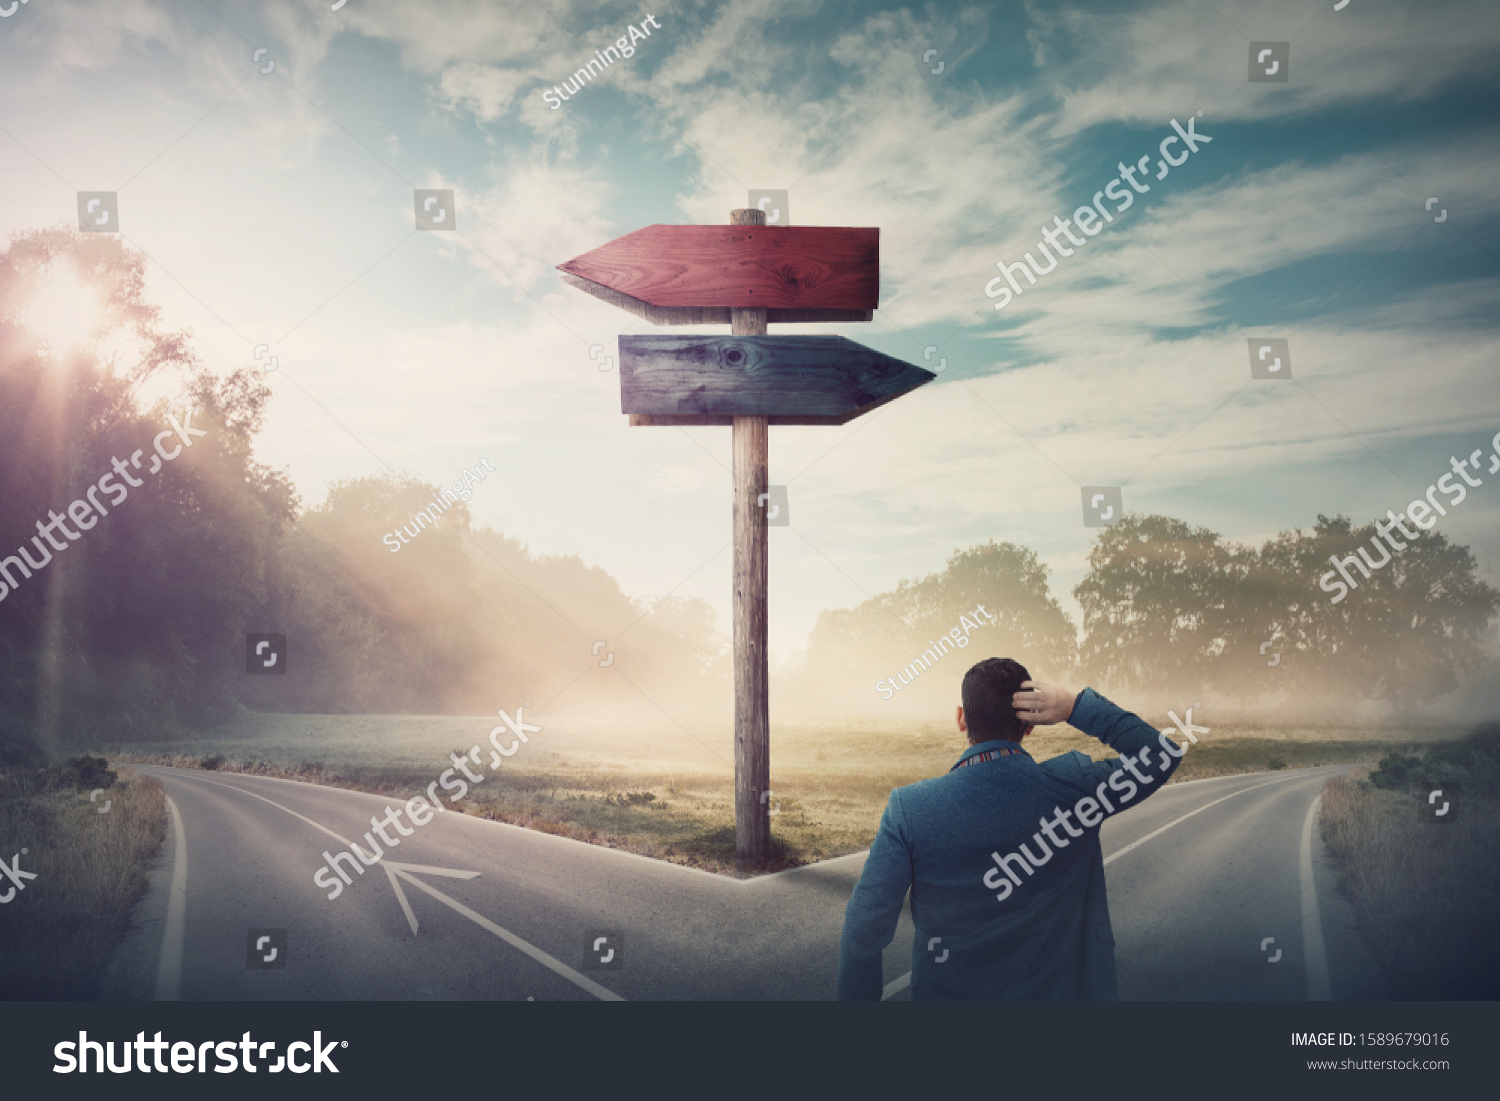 Rear businessman in front of crossroad and signpost arrows shows two different courses, left and right direction to choose. Road splits in distinct direction ways. Difficult decision, choice concept. #1589679016